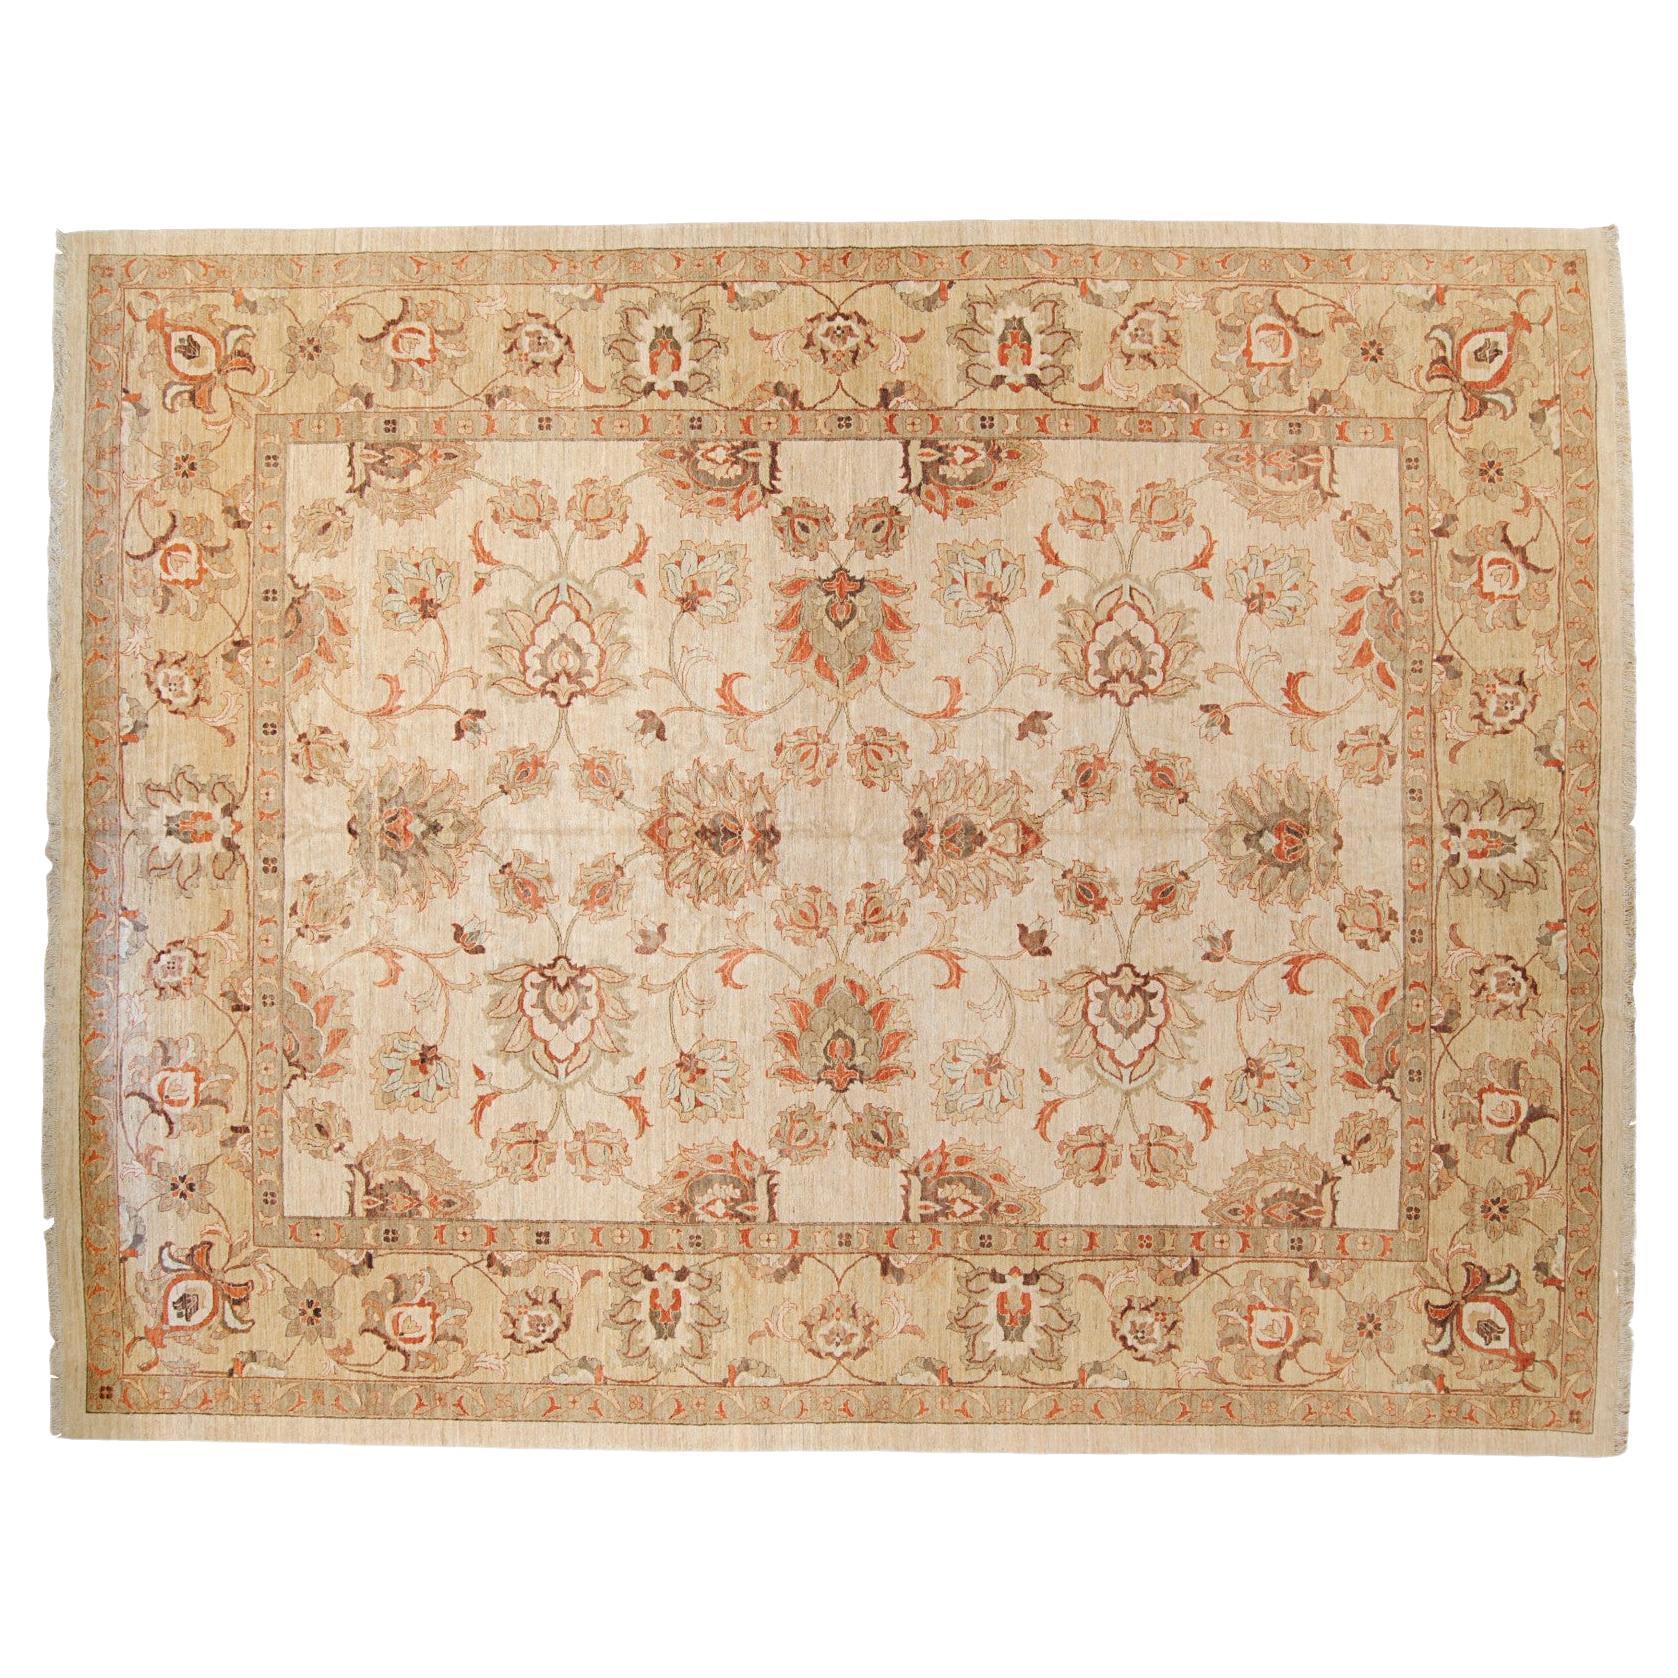 Large cream background rug with the patterns of ancient Agra For Sale